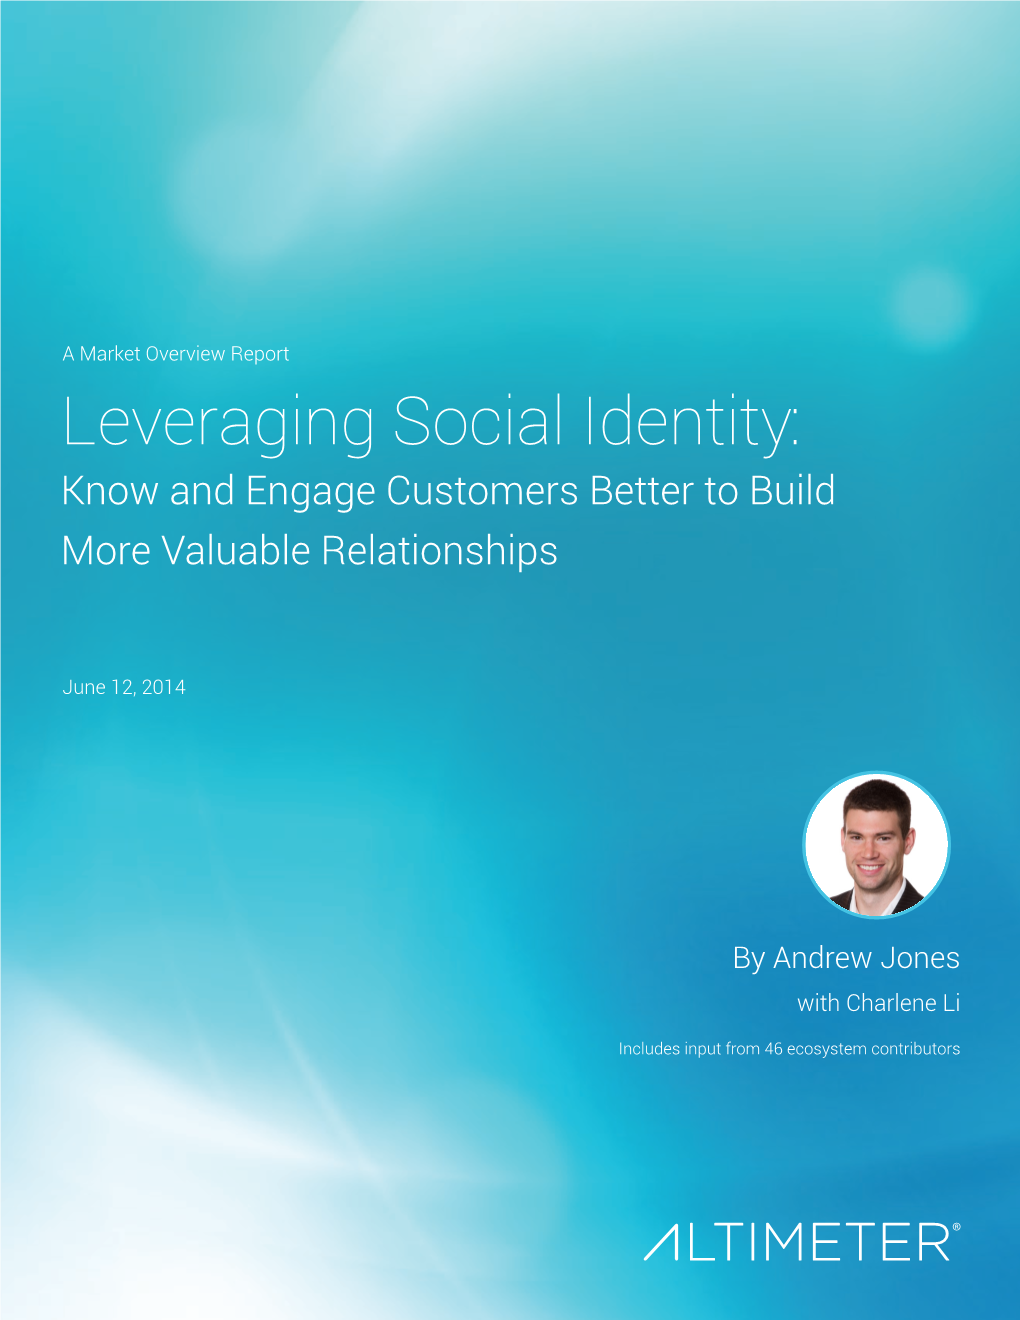 Leveraging Social Identity: Know and Engage Customers Better to Build More Valuable Relationships